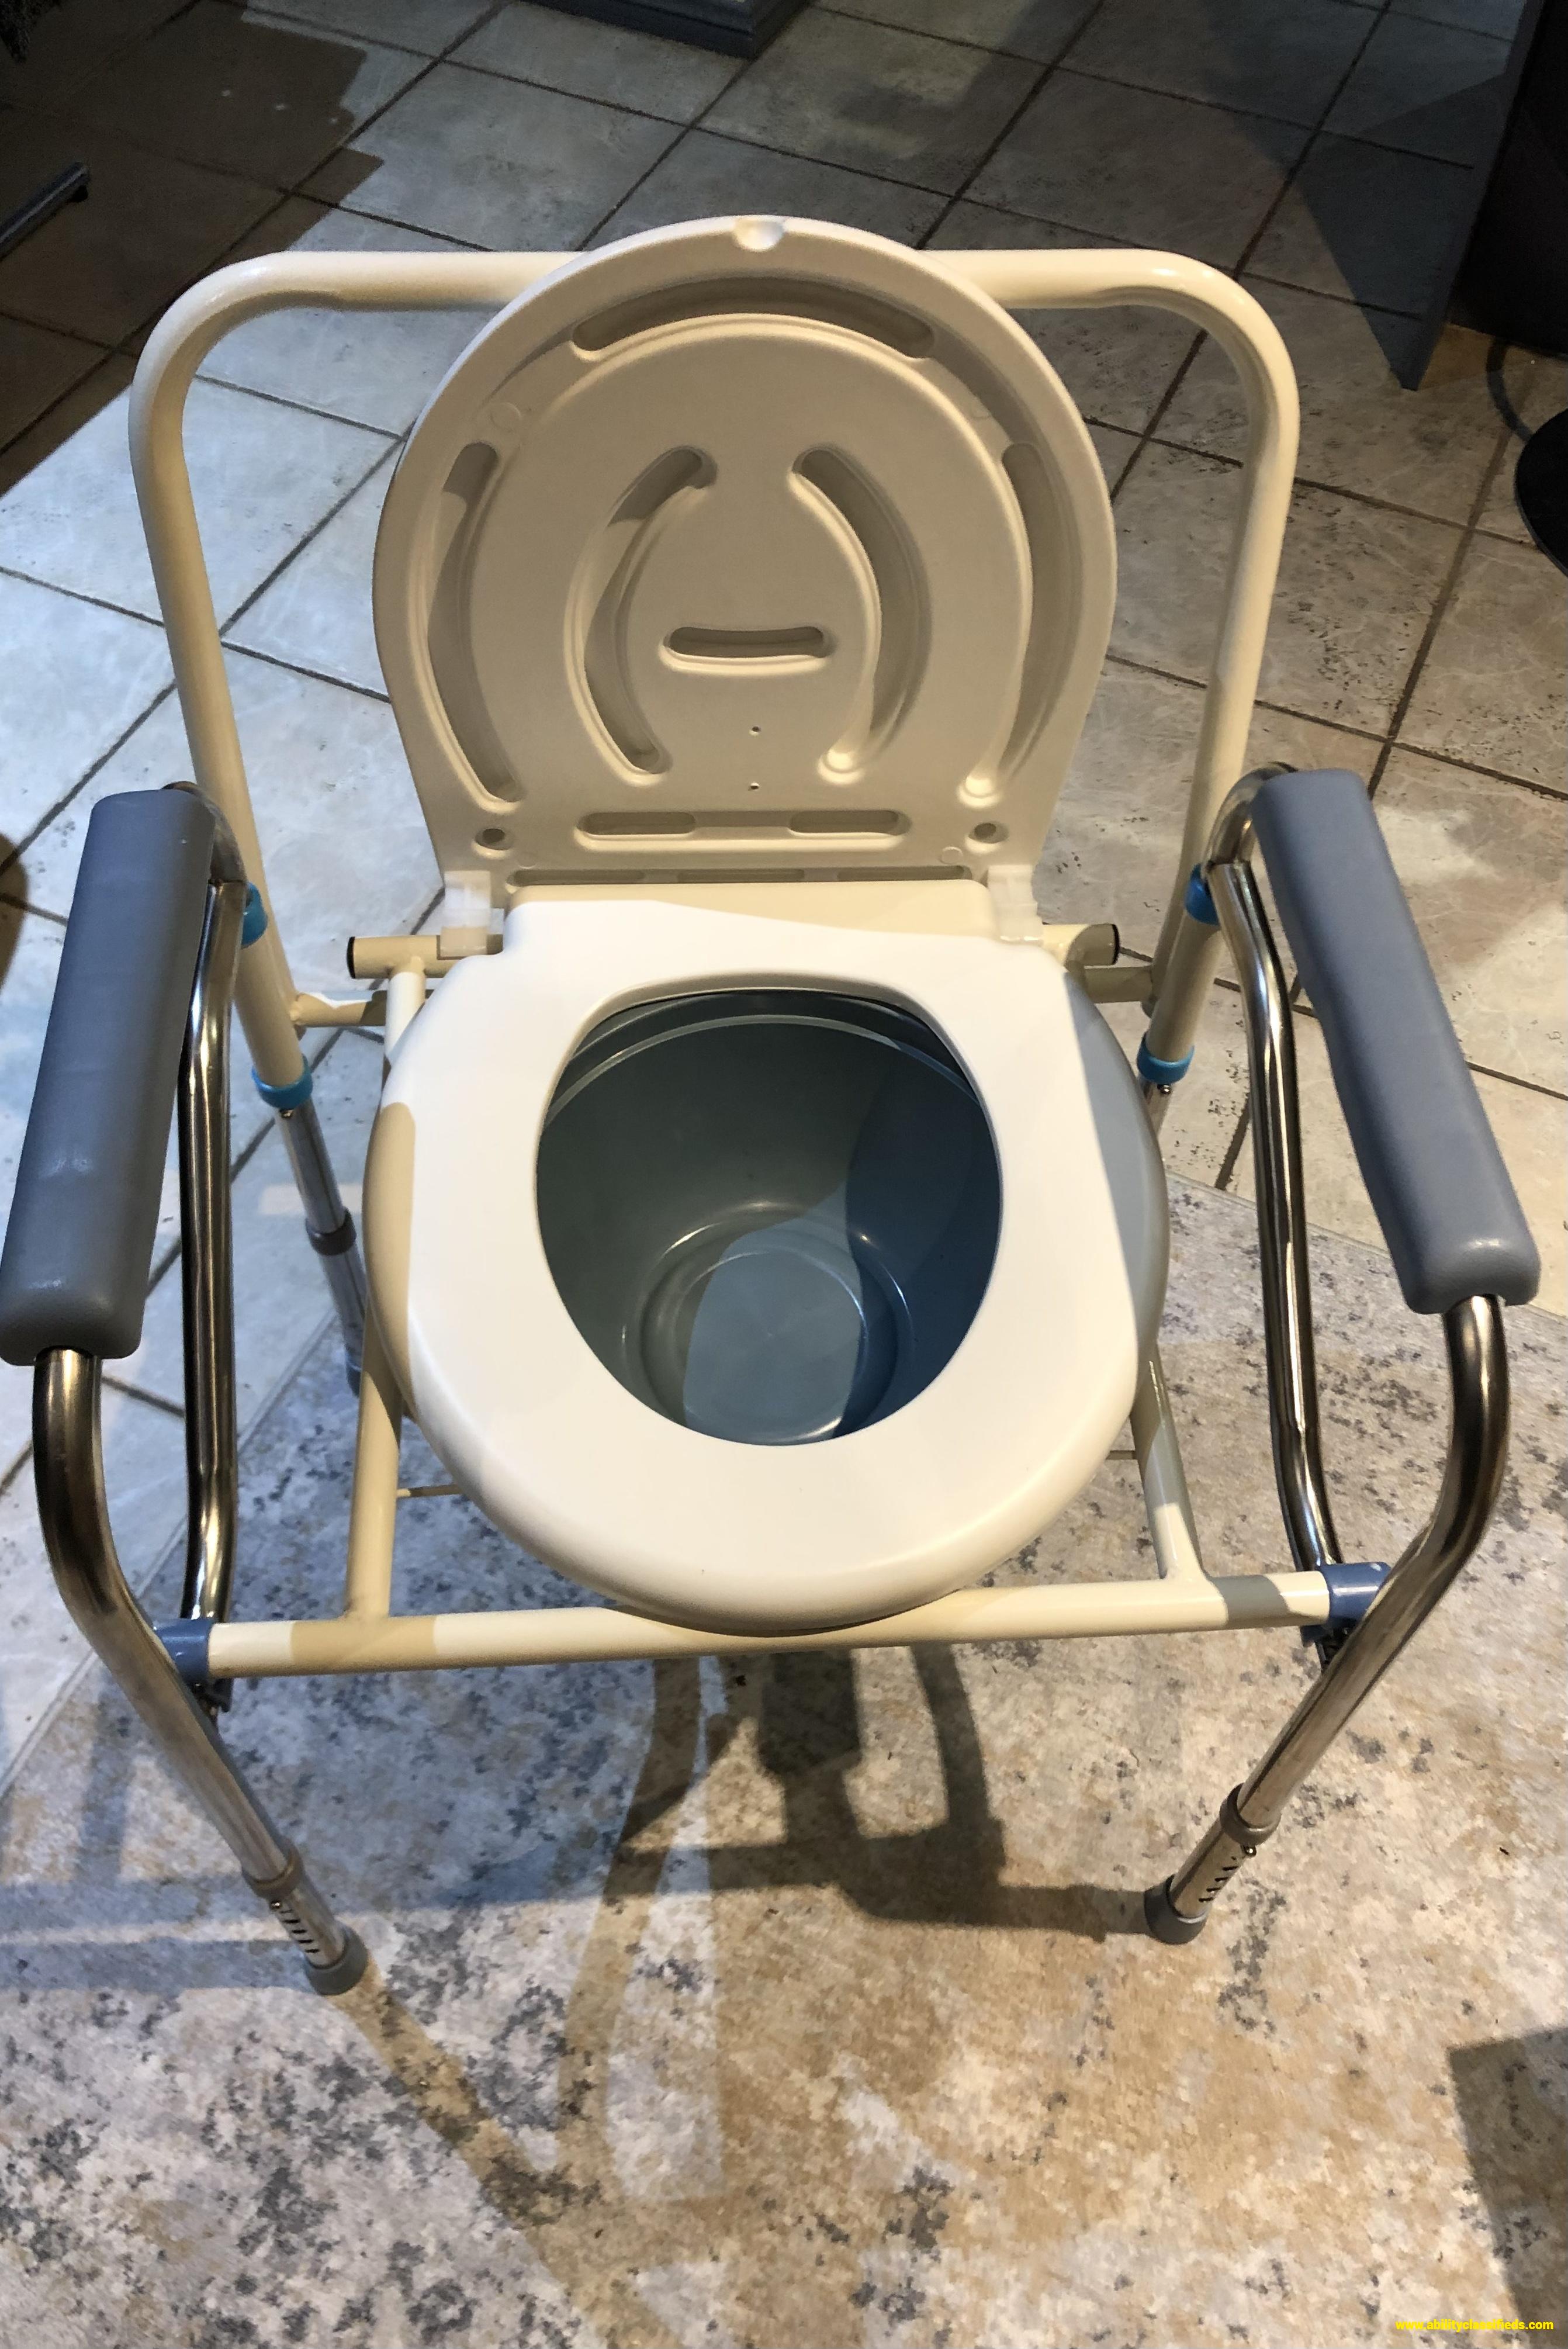 Adjustable Commode